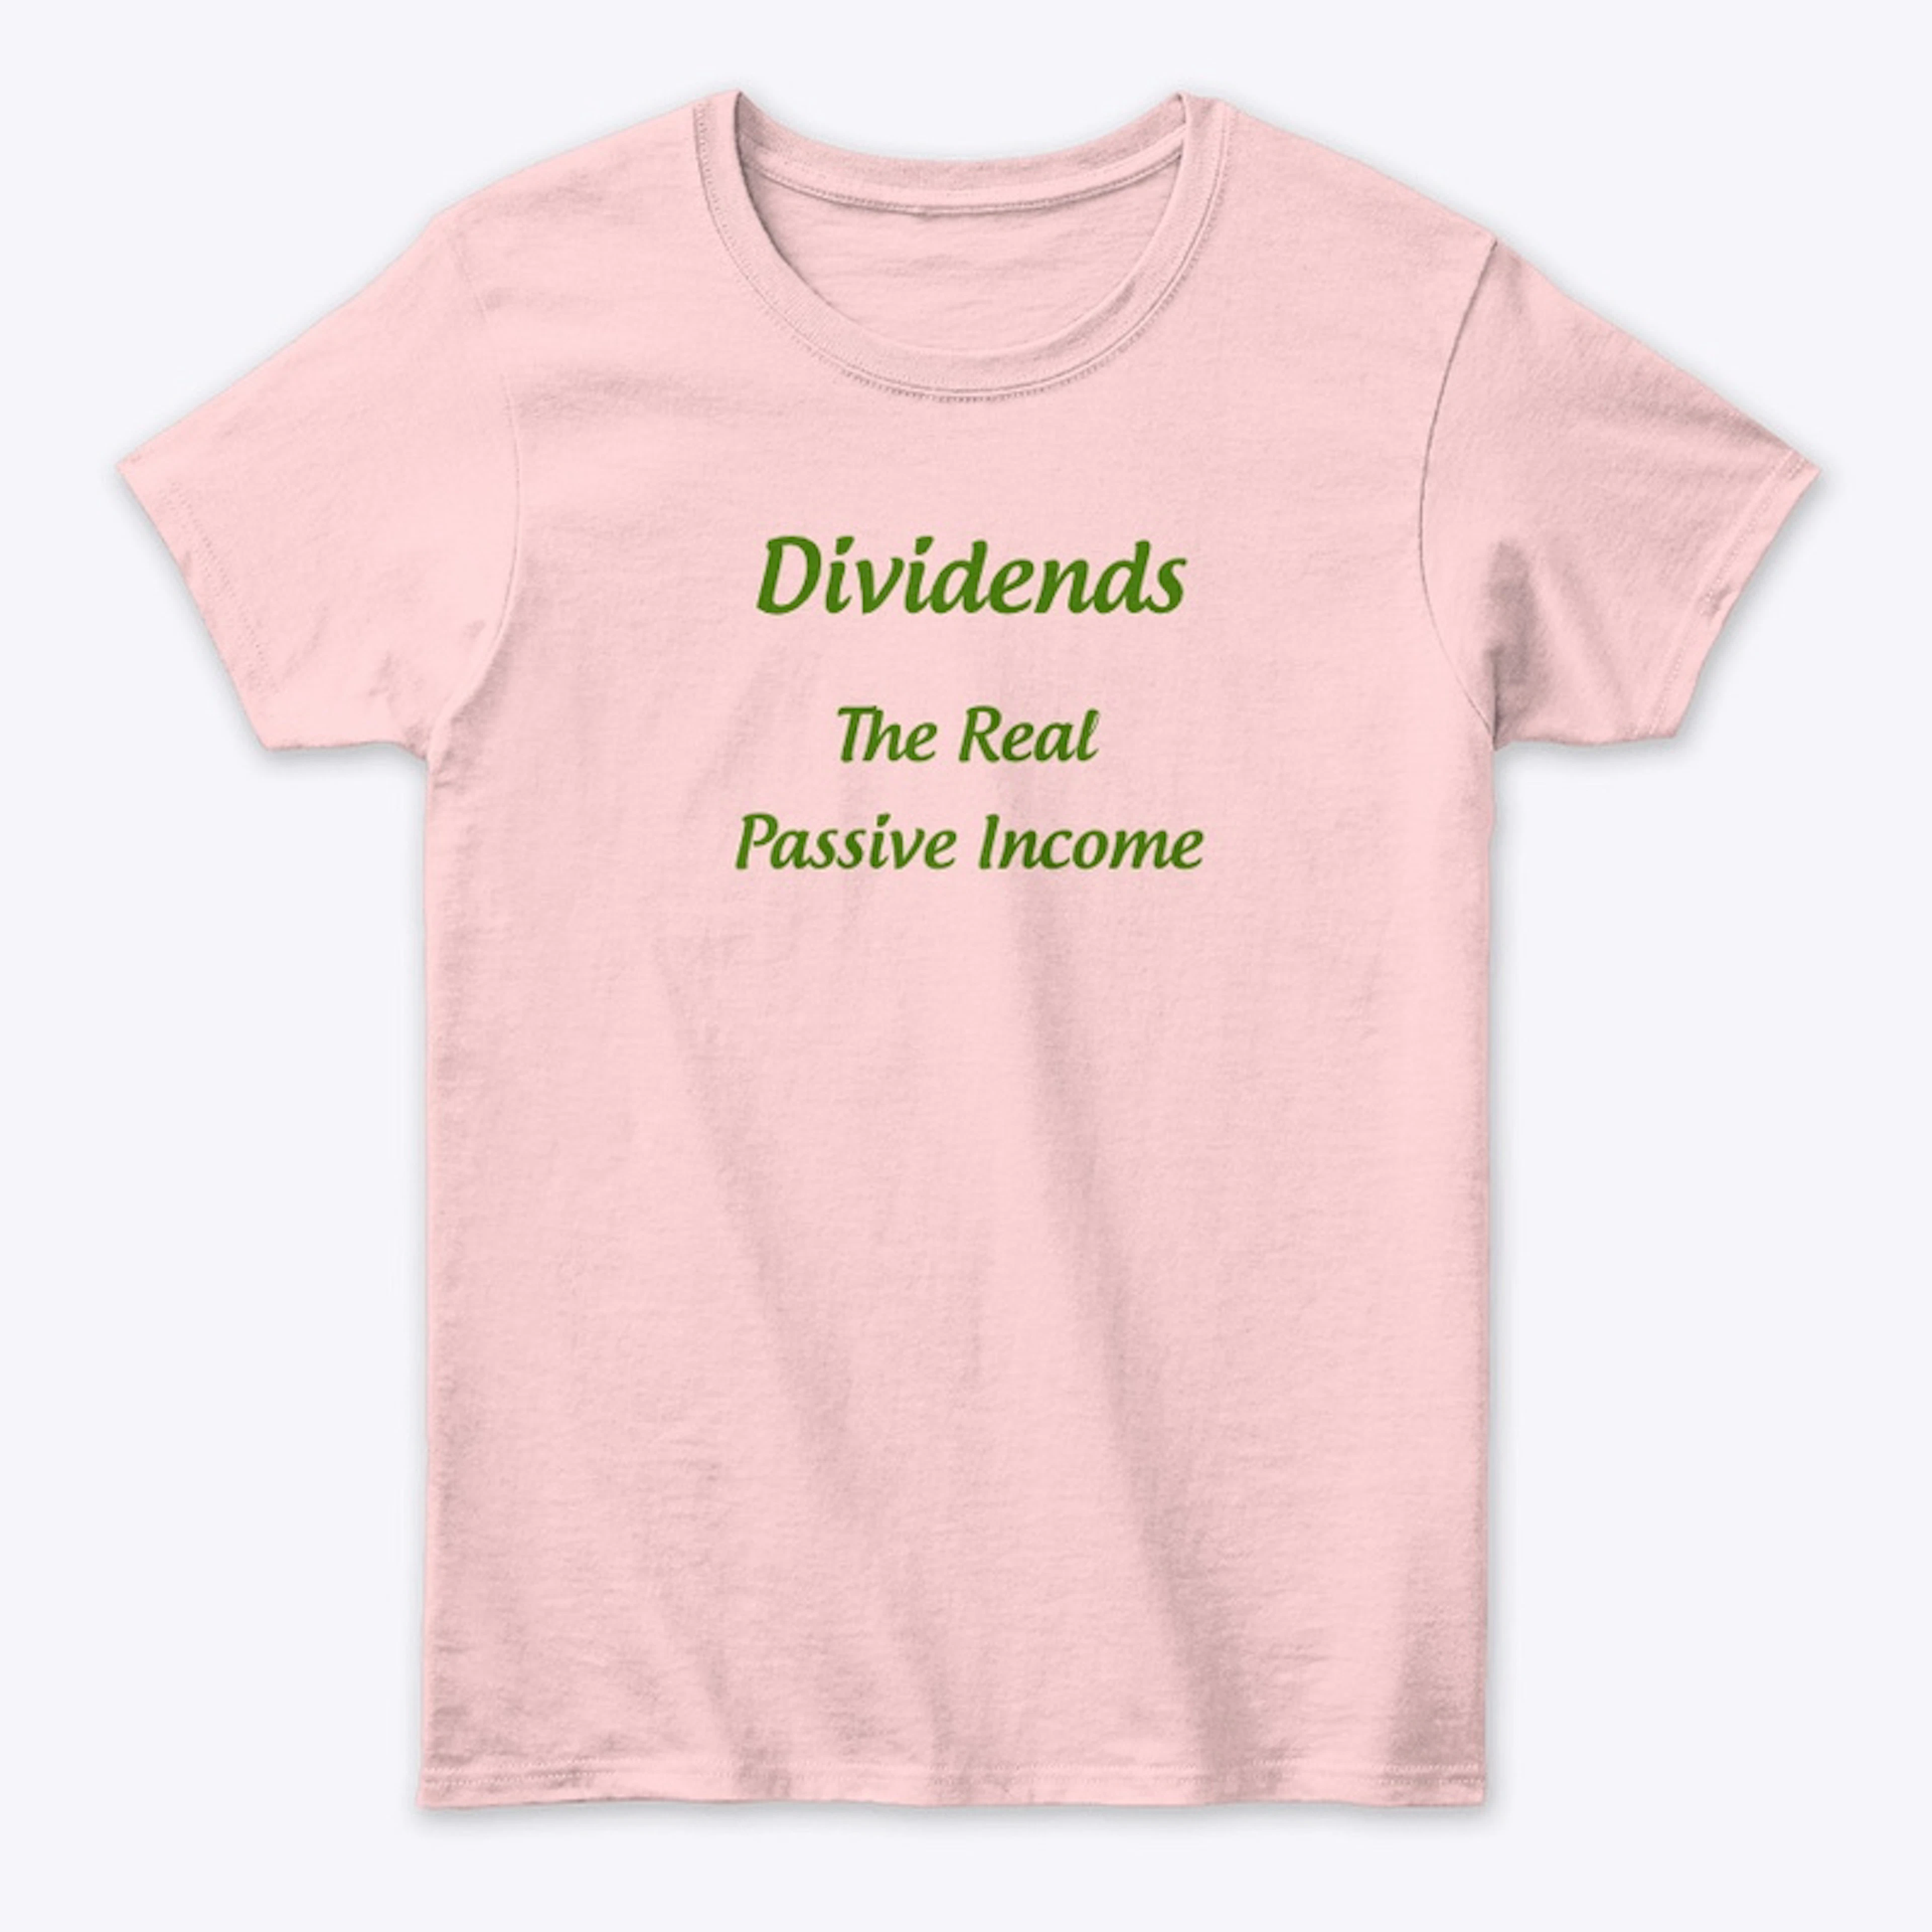 Dividends The Real Passive Income